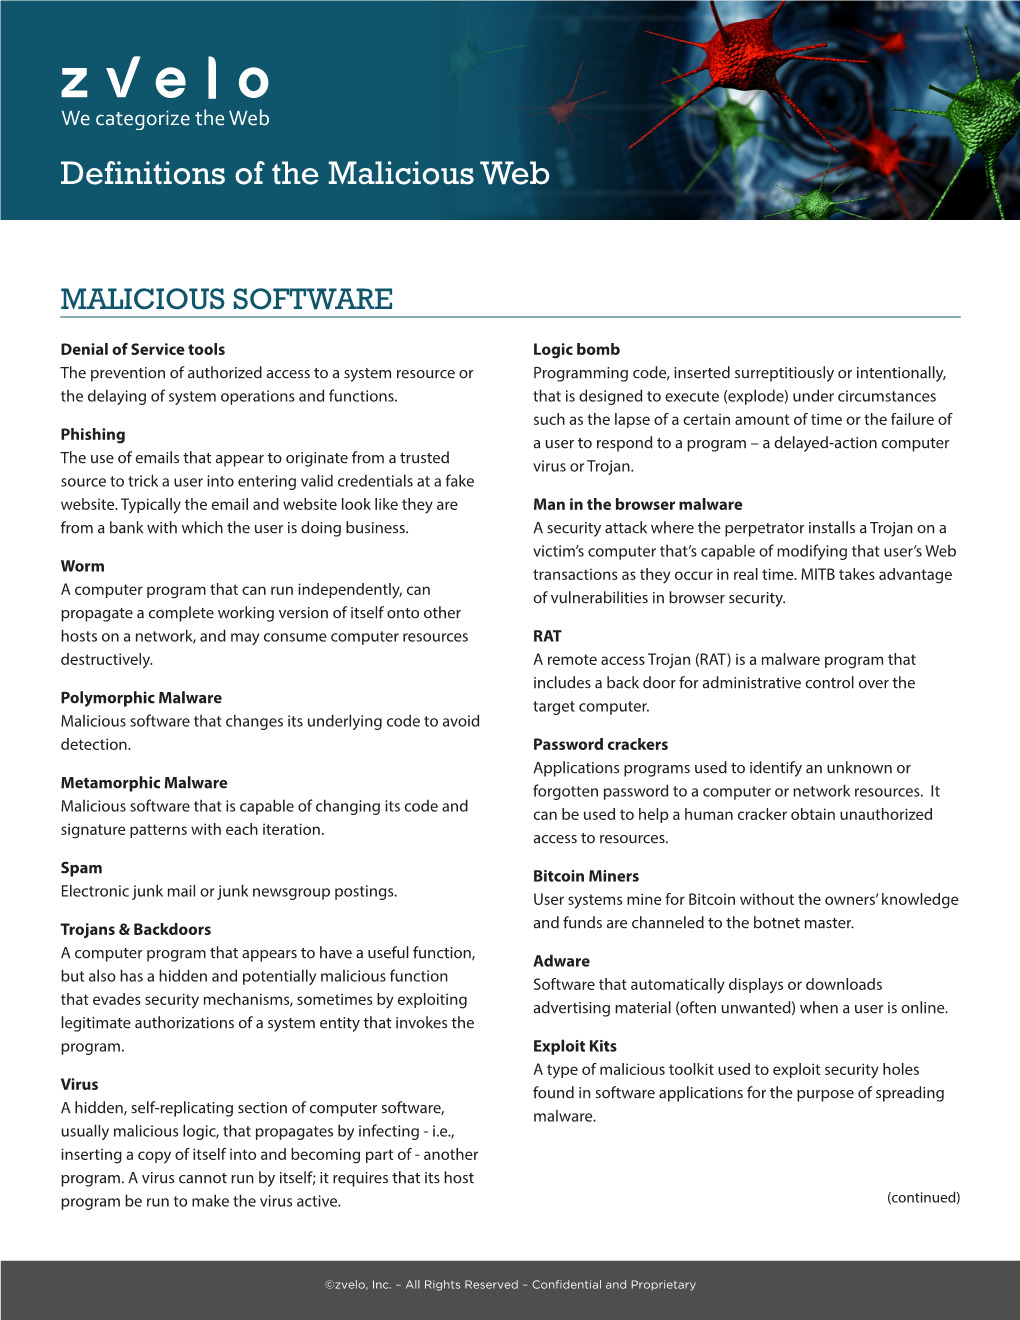 Definitions of the Malicious Web